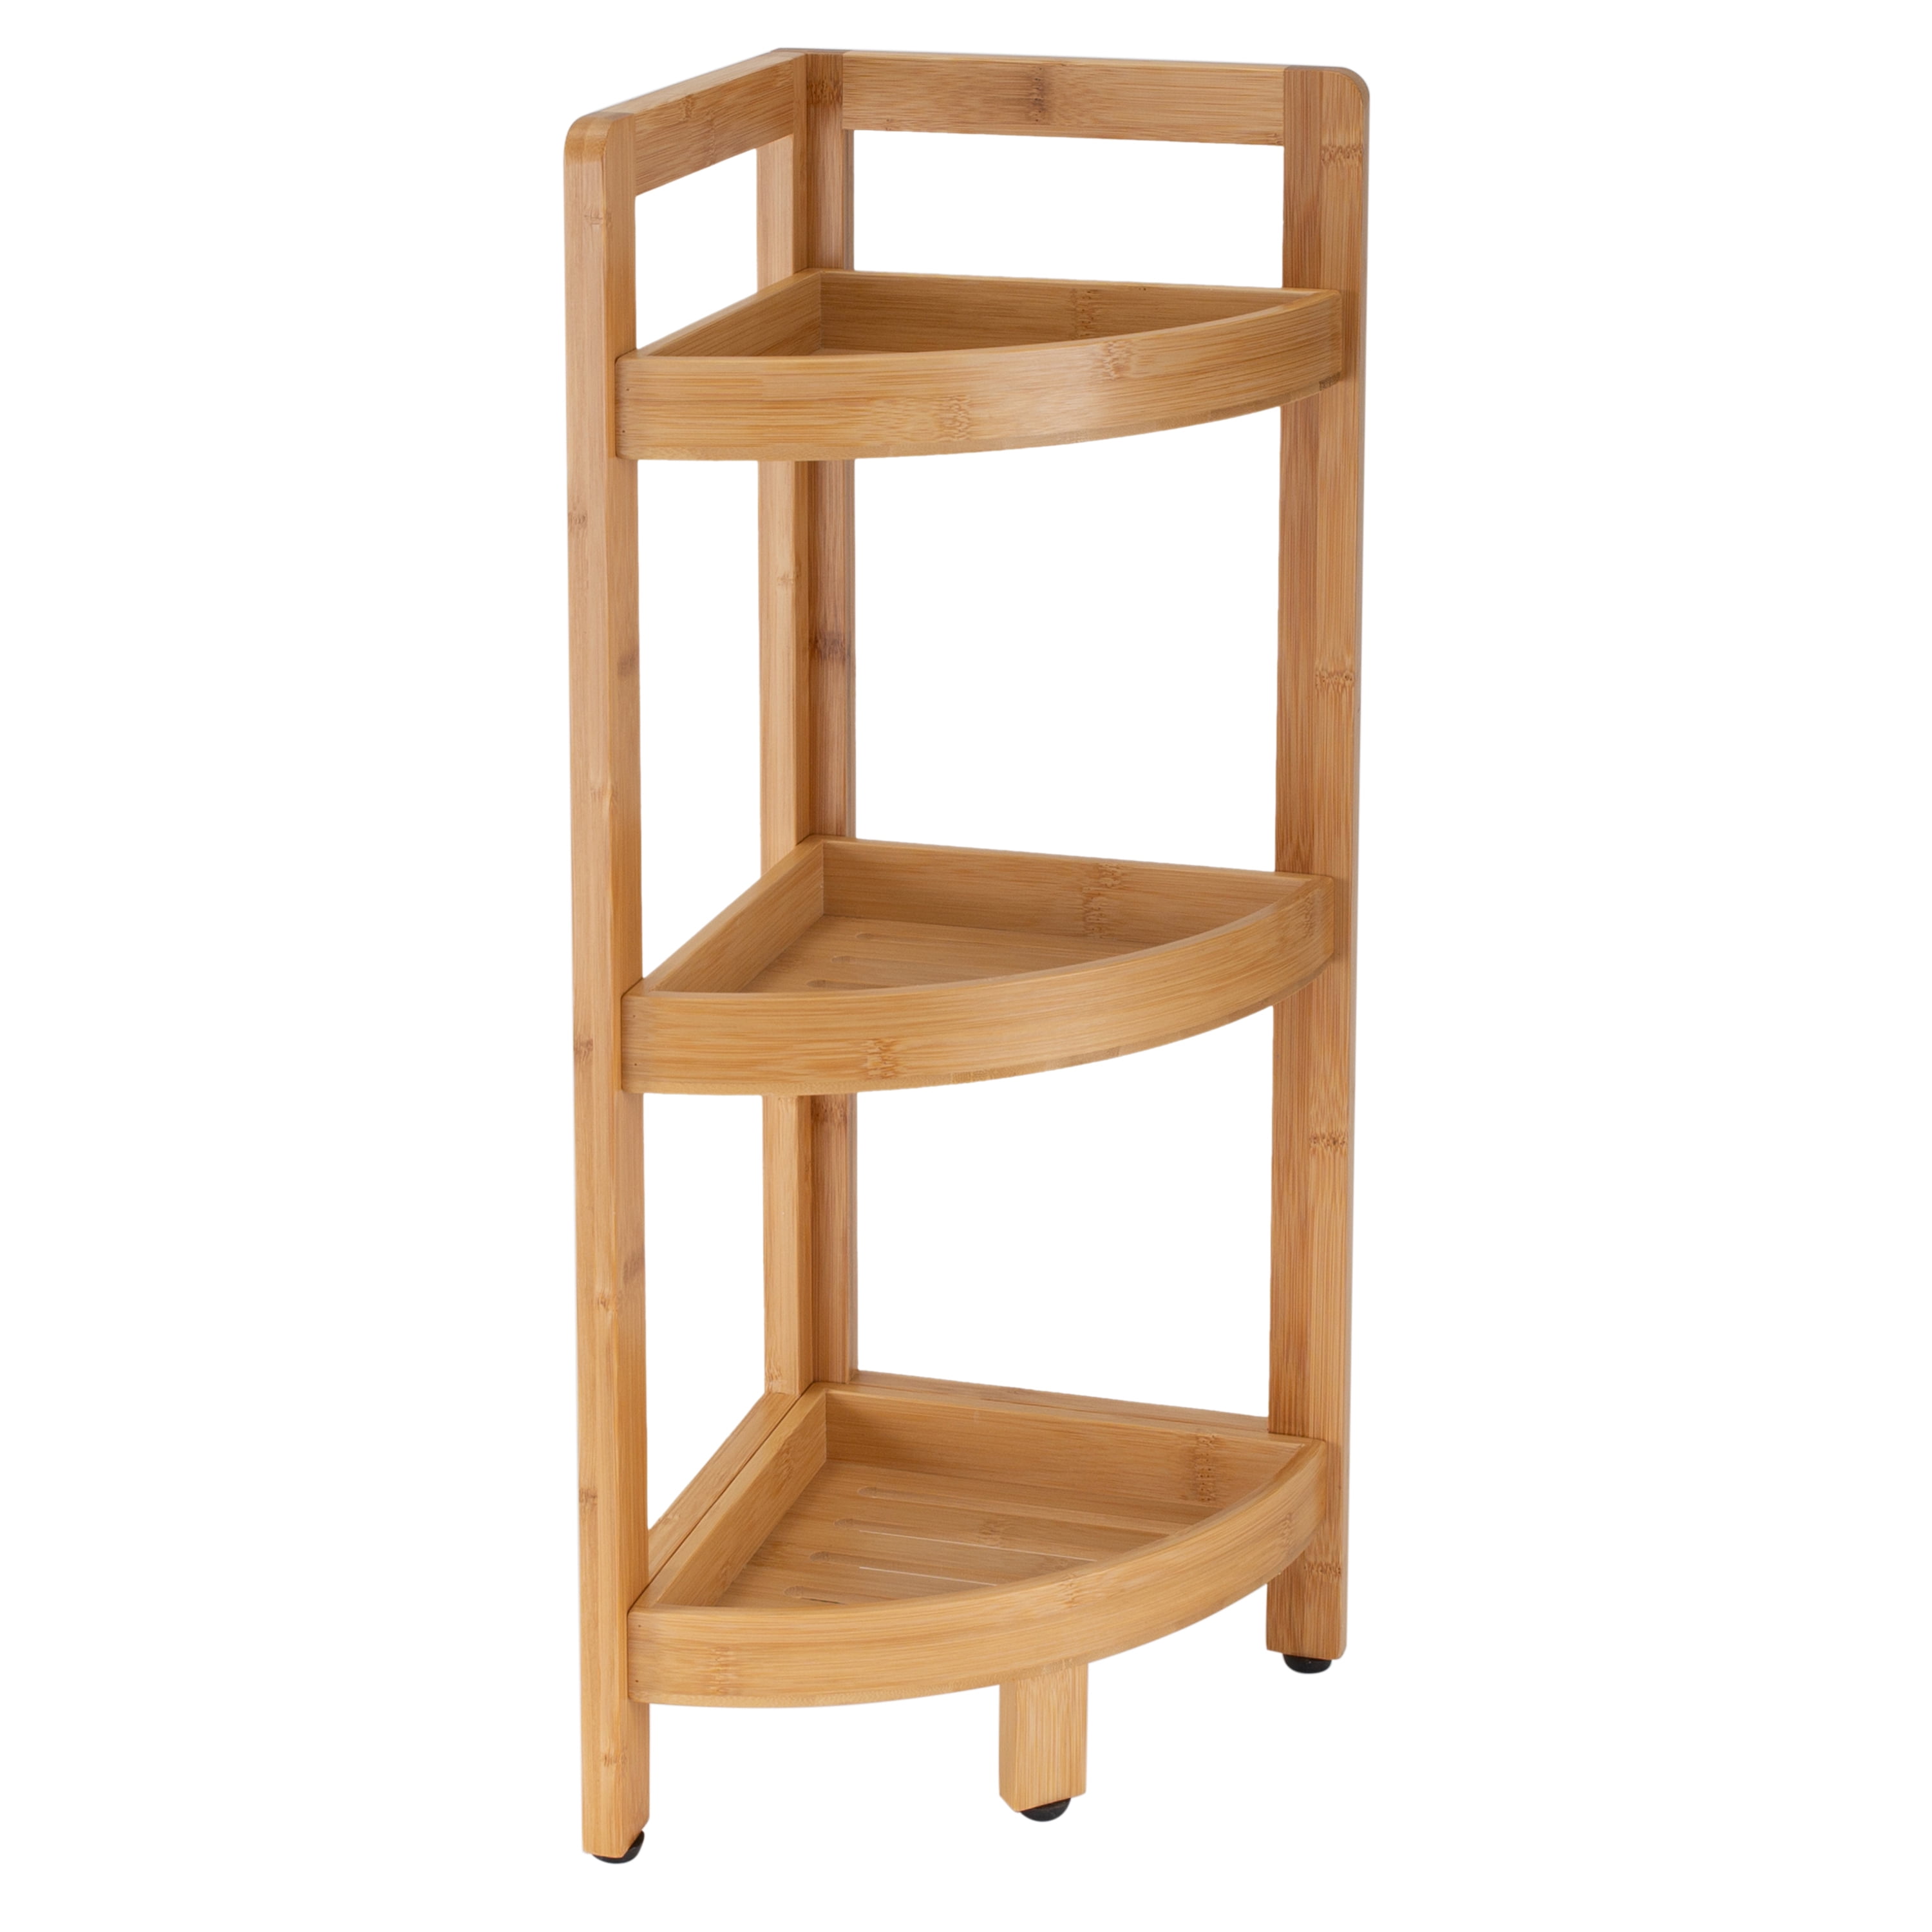 5five Simply Smart trolley shelf with 3 shelves, serving trolley, bamboo,  74.